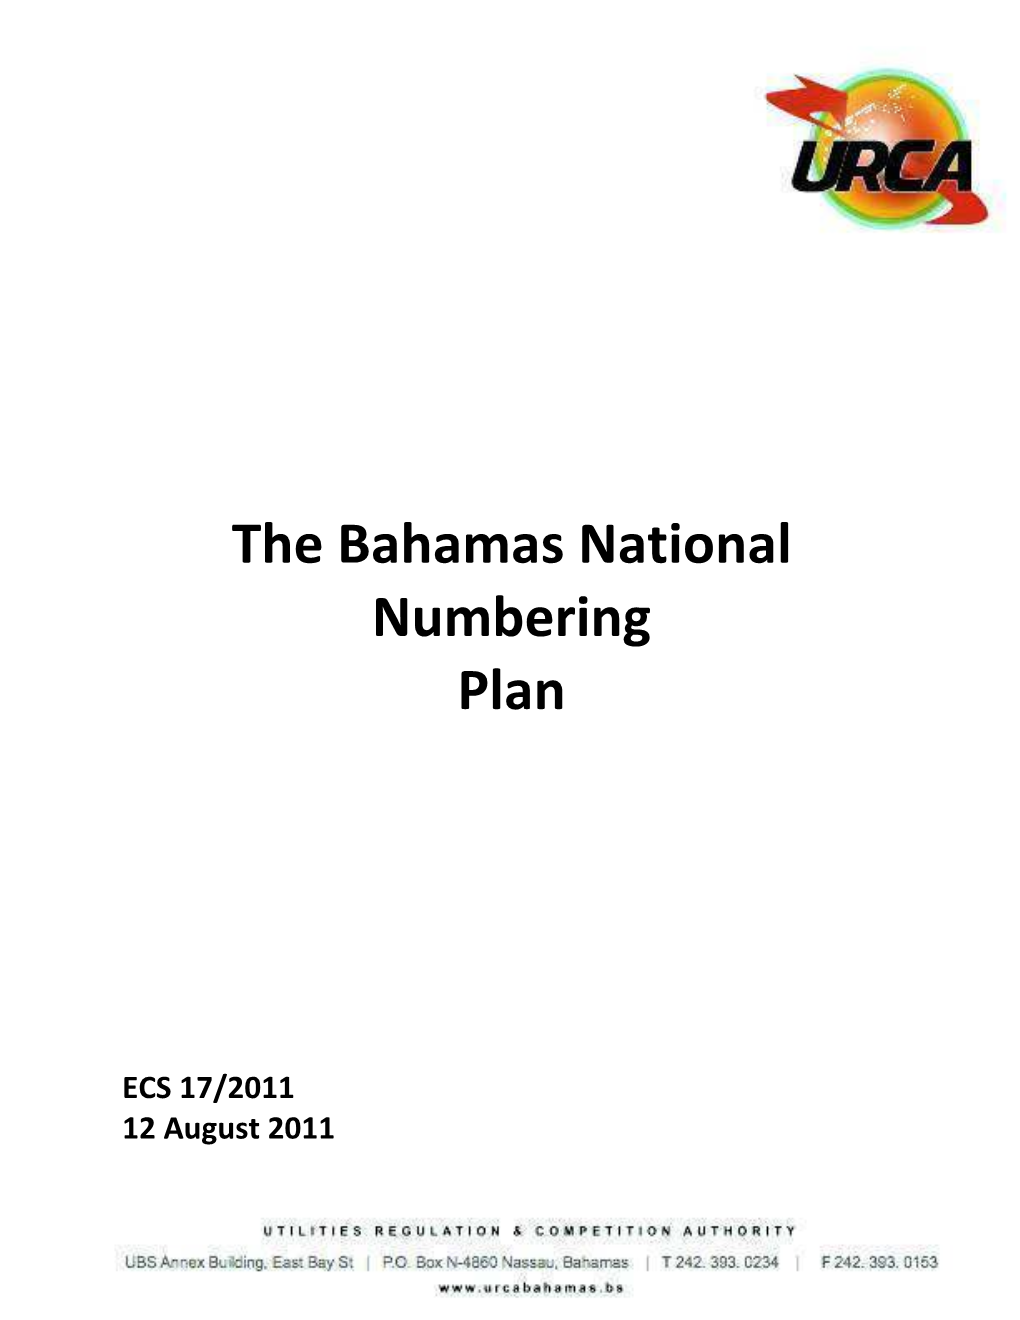 The Bahamas National Numbering Plan